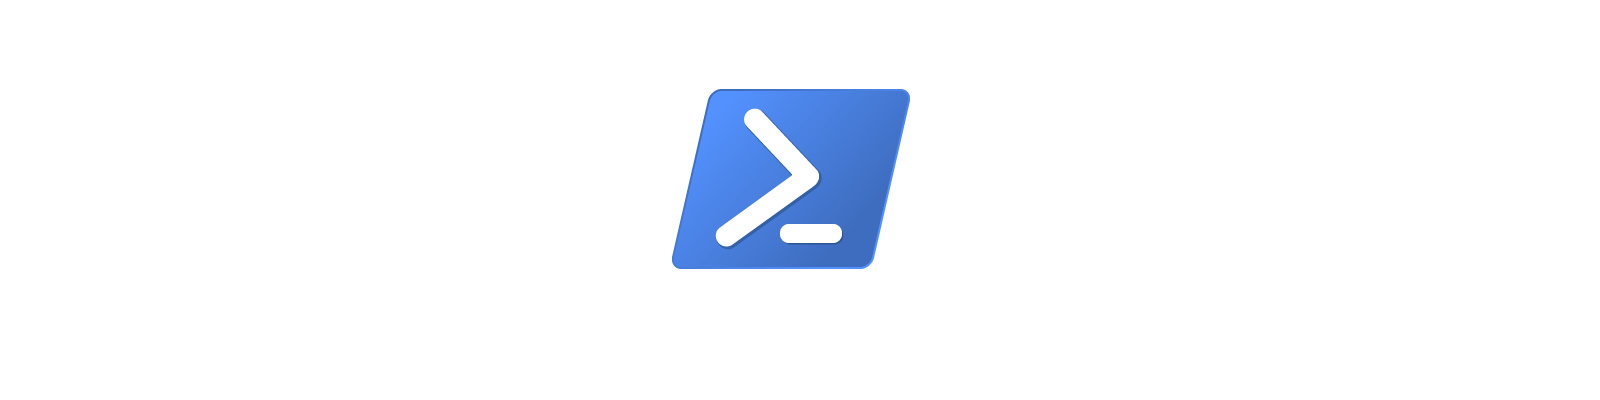 PowerCLI Core on Mac or Linux made easy, with help!